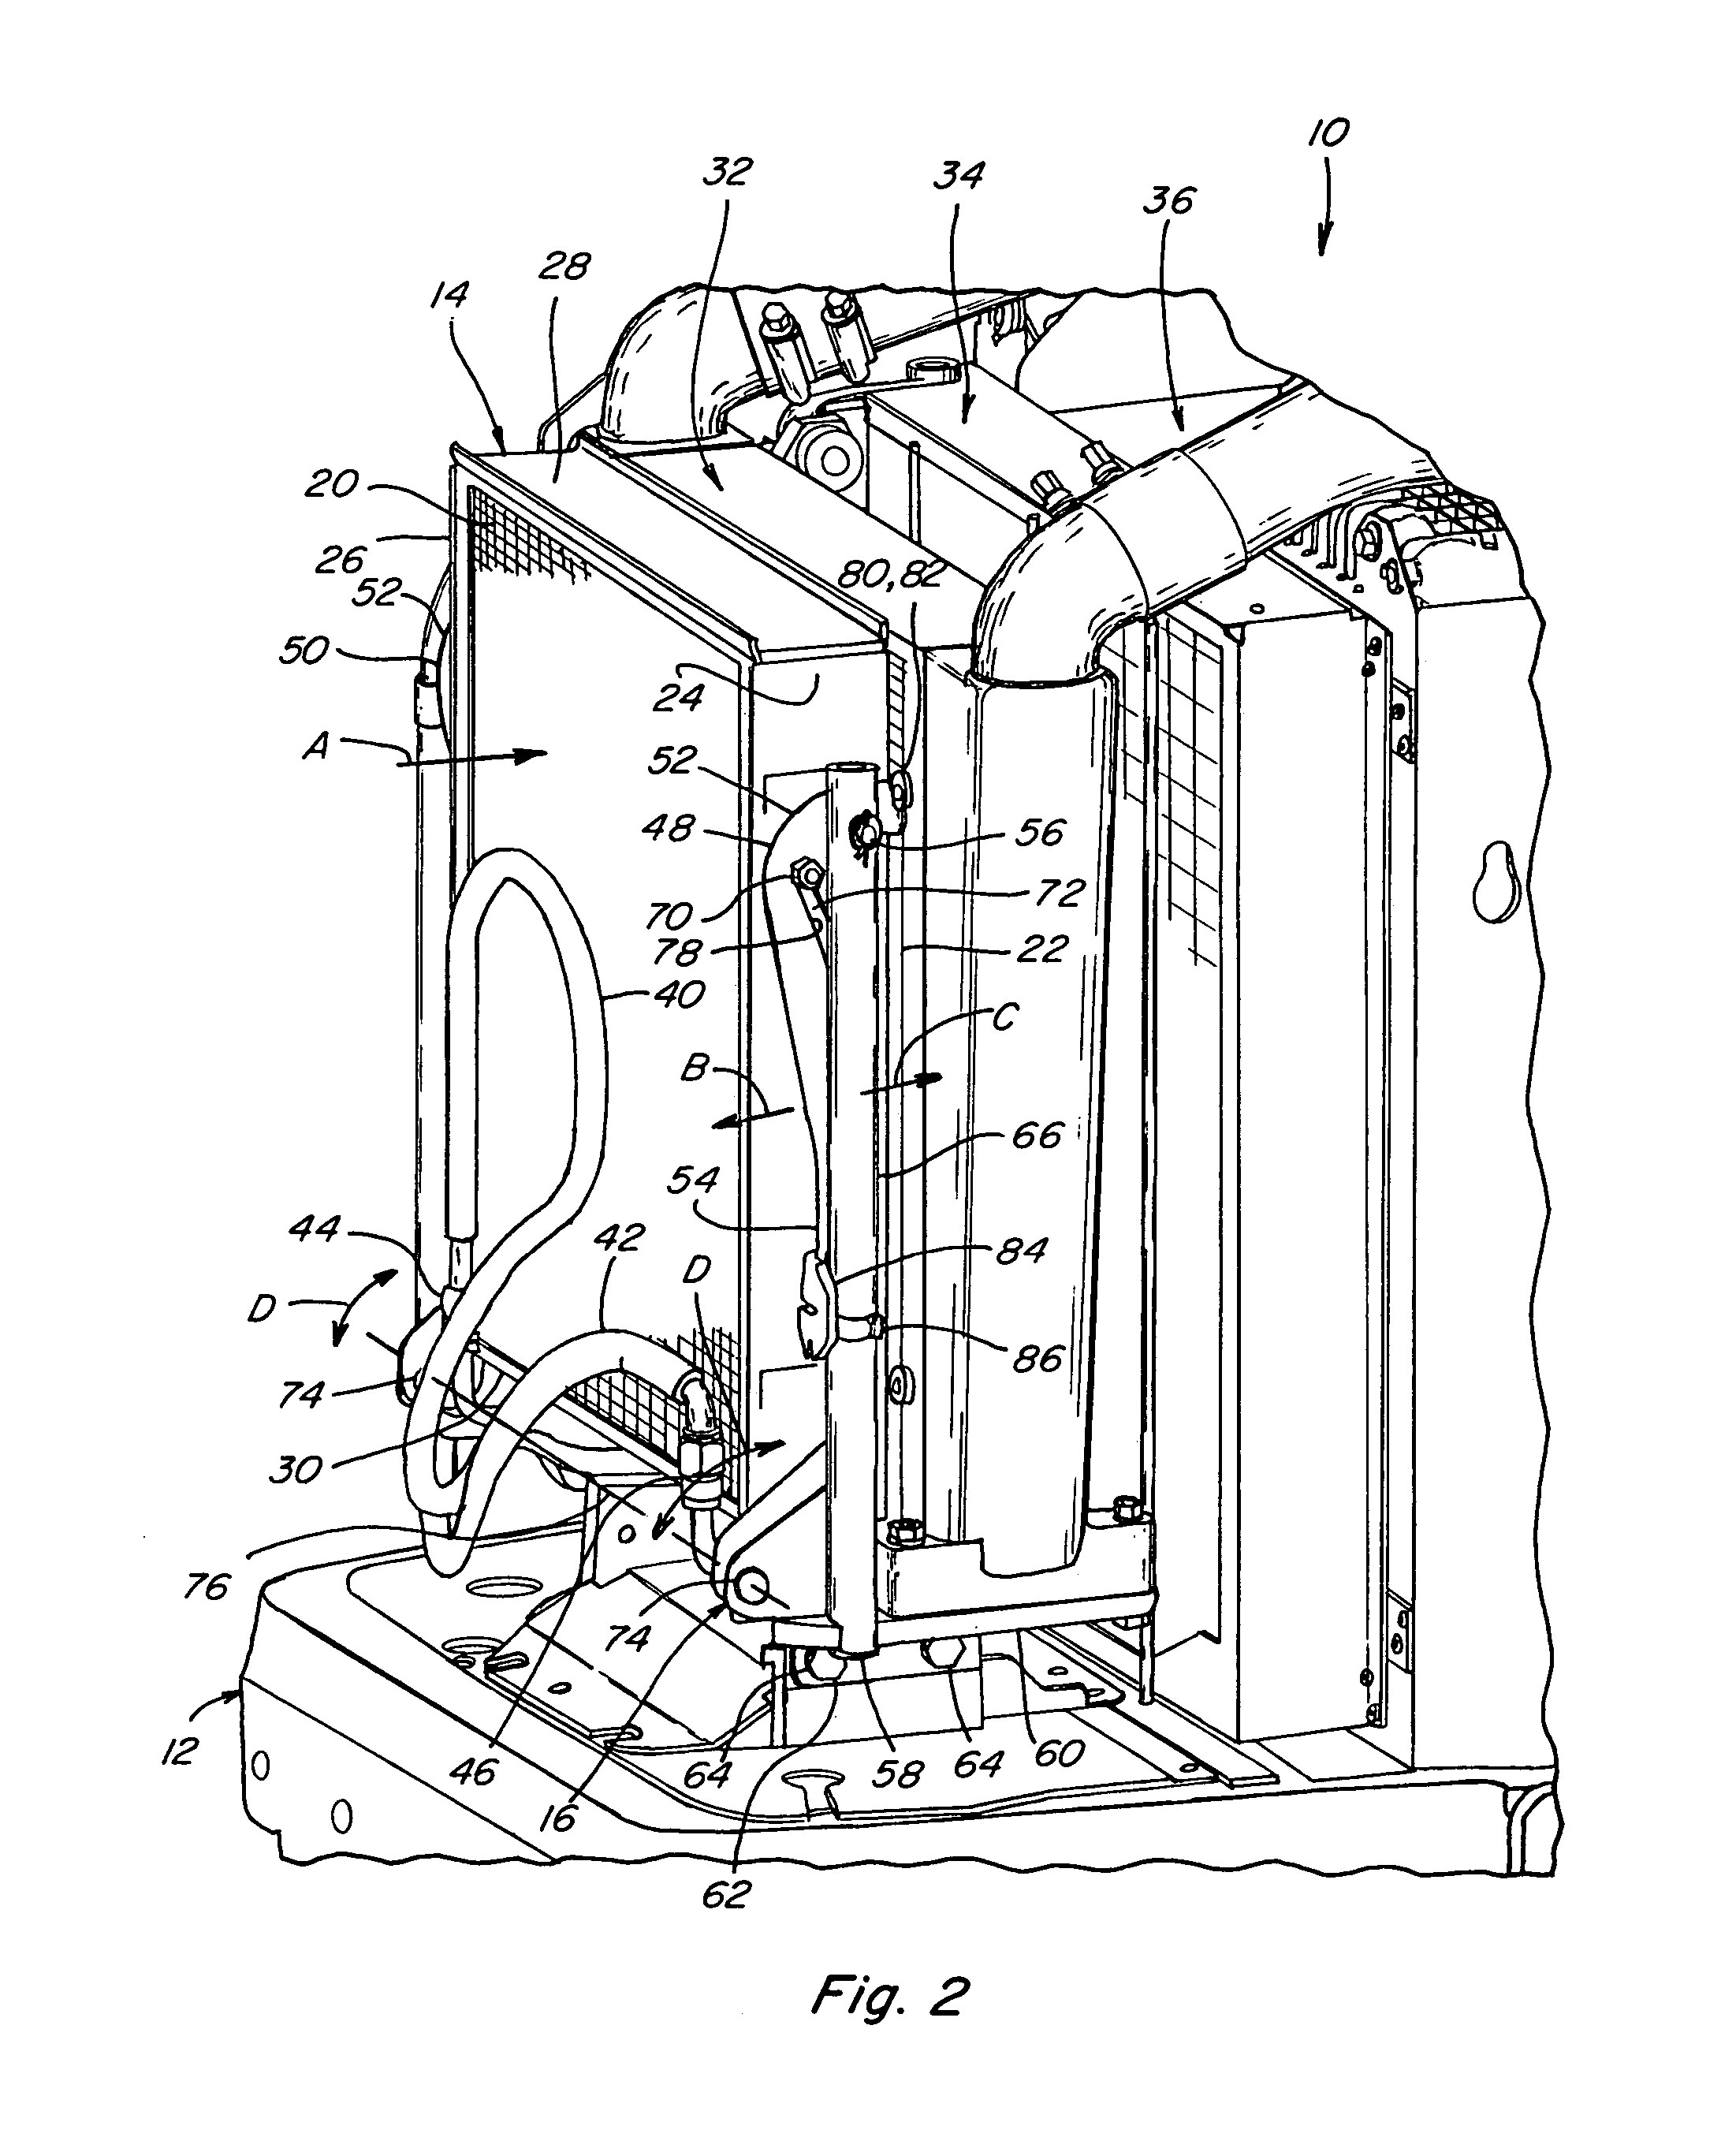 Apparatus for tilting and securing a heat exchanger